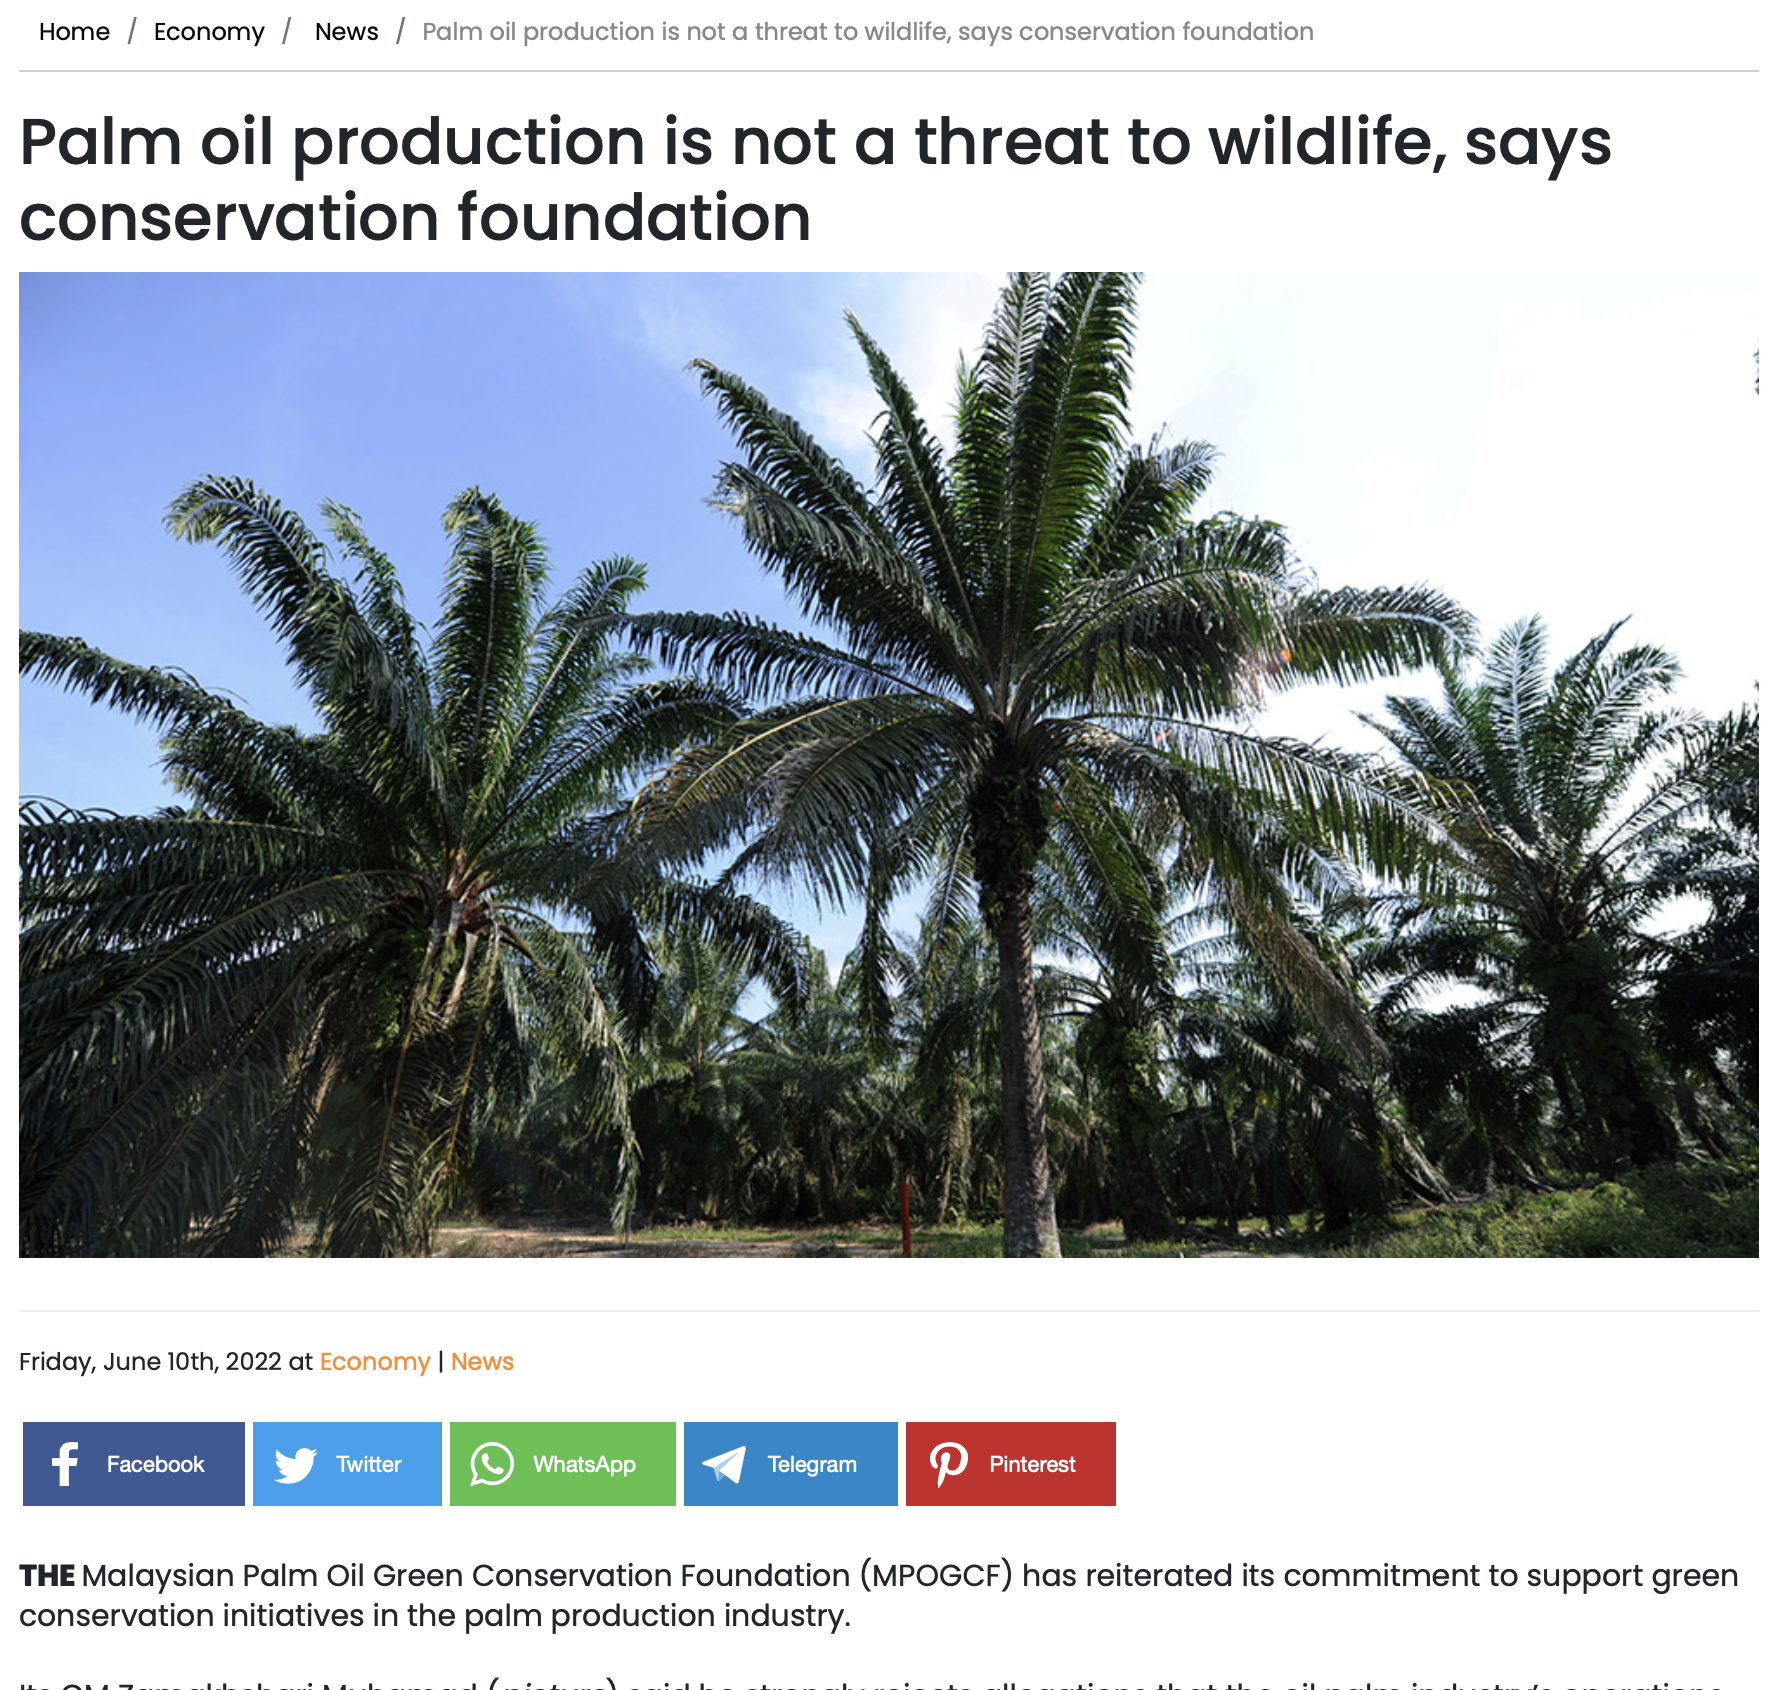 Palm oil production is not a threat to wildlife, says conservation foundation